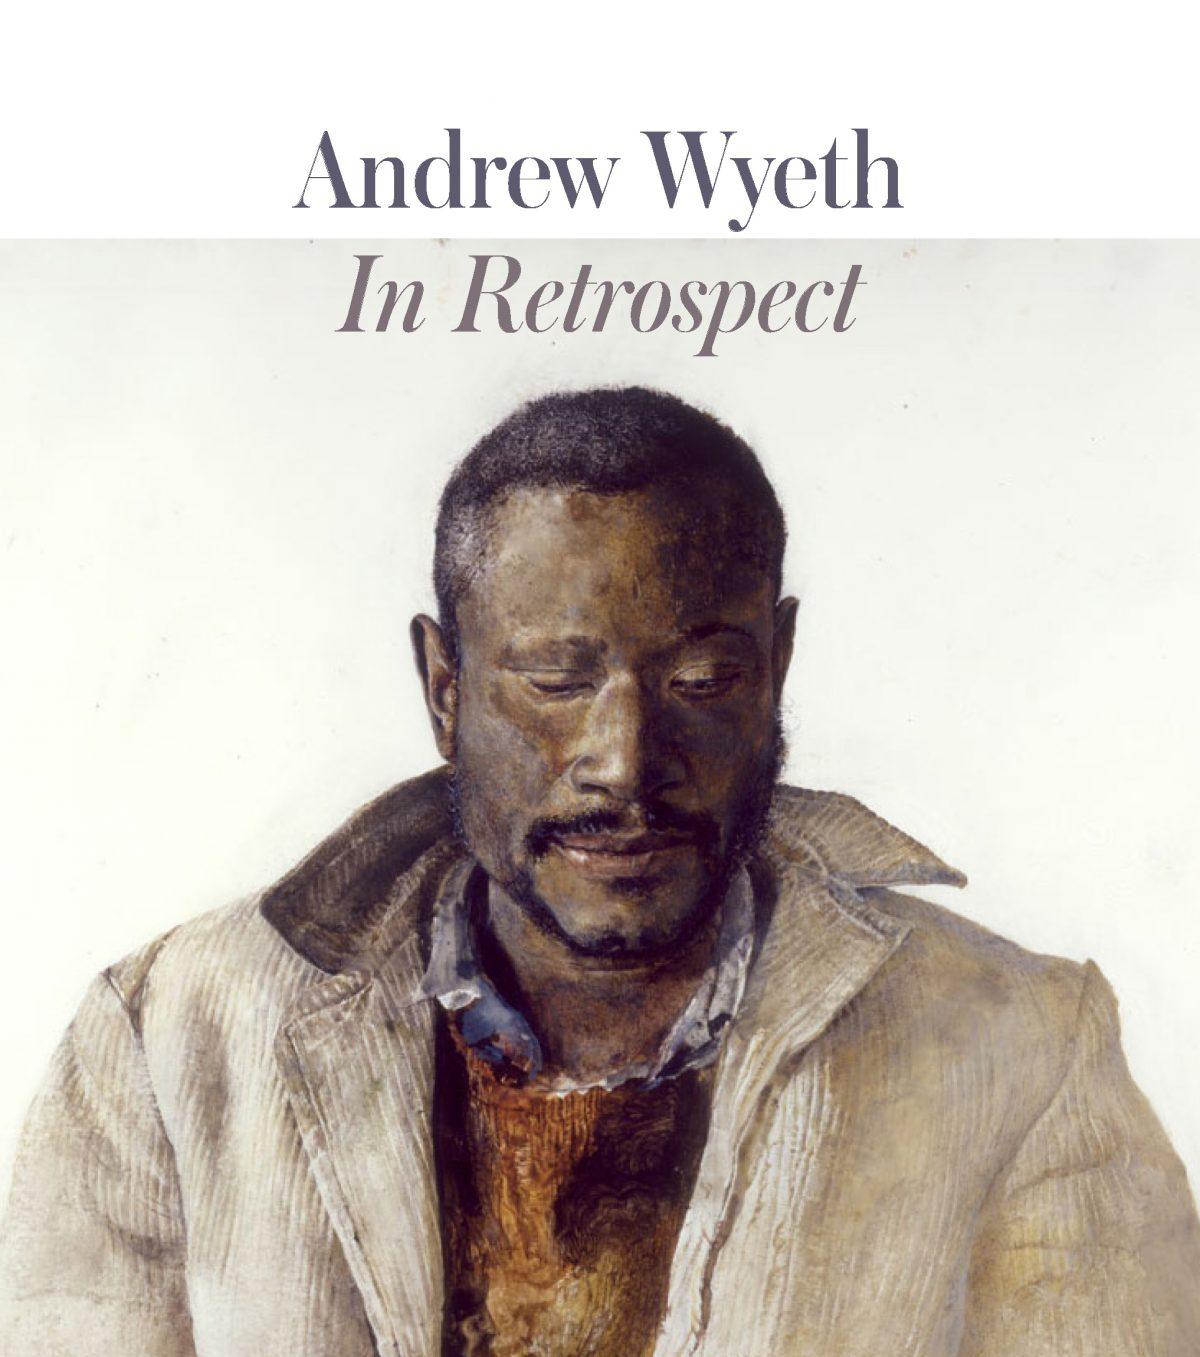 Cover of exhibition catalog, "Andrew Wyeth: In Retrospect" with the painting "The Drifter," 1964, by Andrew Wyeth (1917–2009). Drybrush watercolor on paper, collection of Phyllis and Jamie Wyeth. (Andrew Wyeth/Artist Rights Society)